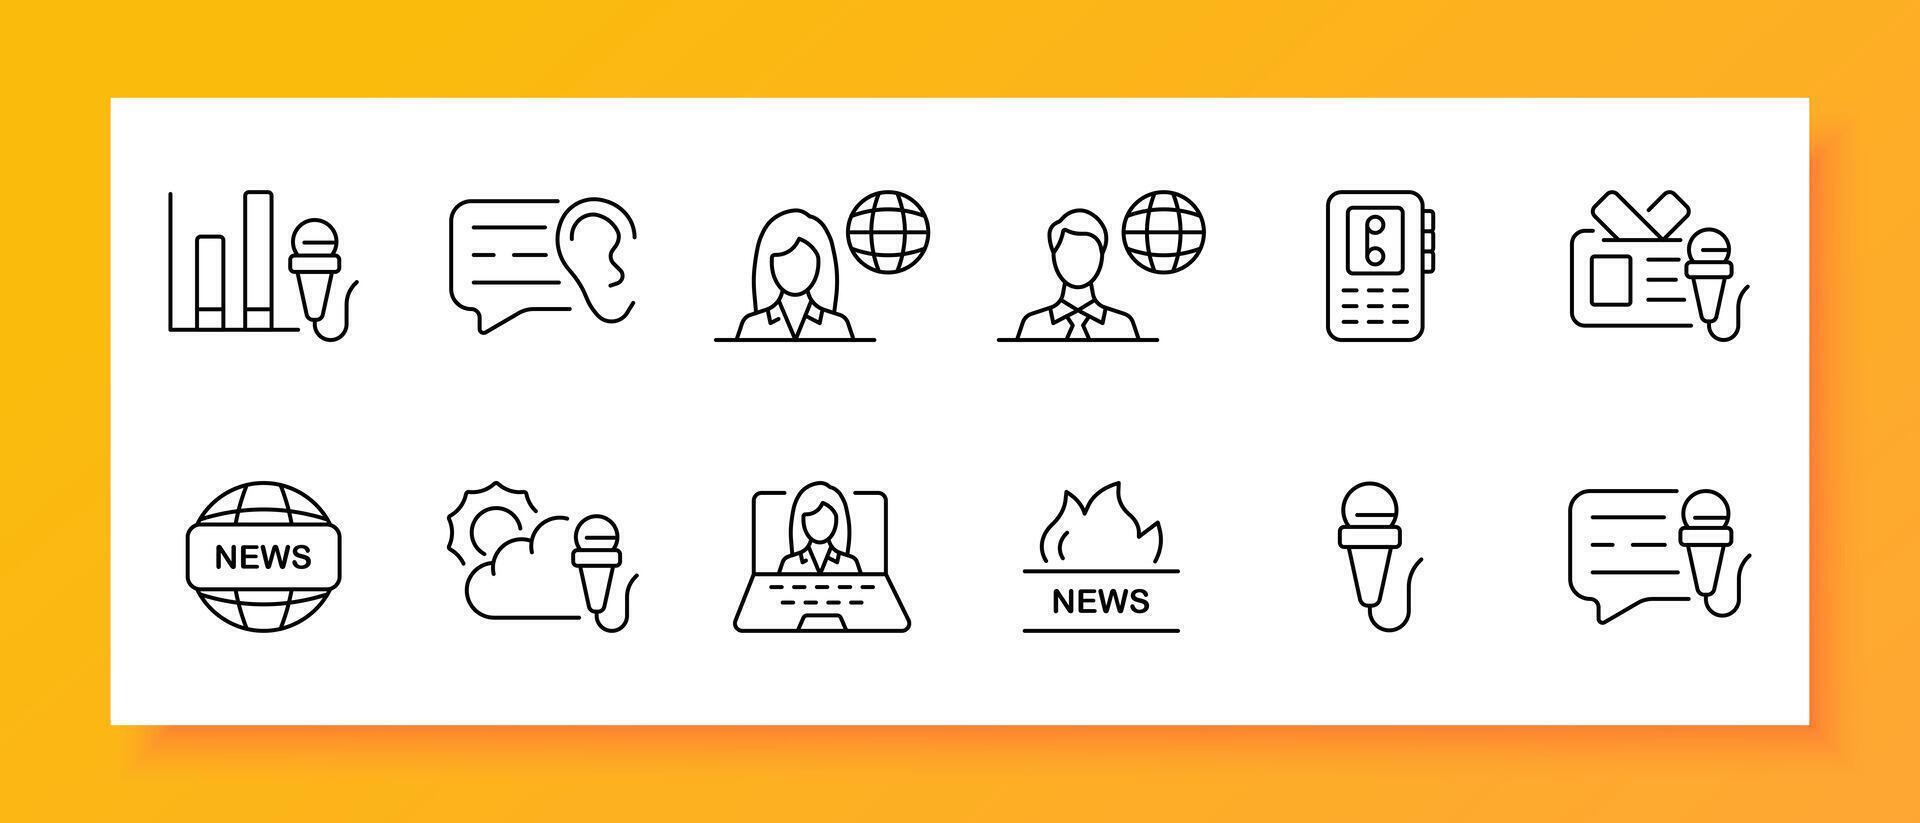 News icon set. Microphone, schedule, reporter, message, ticker, audience, prime time. Black icon on a white background. Vector line icon for business and advertising